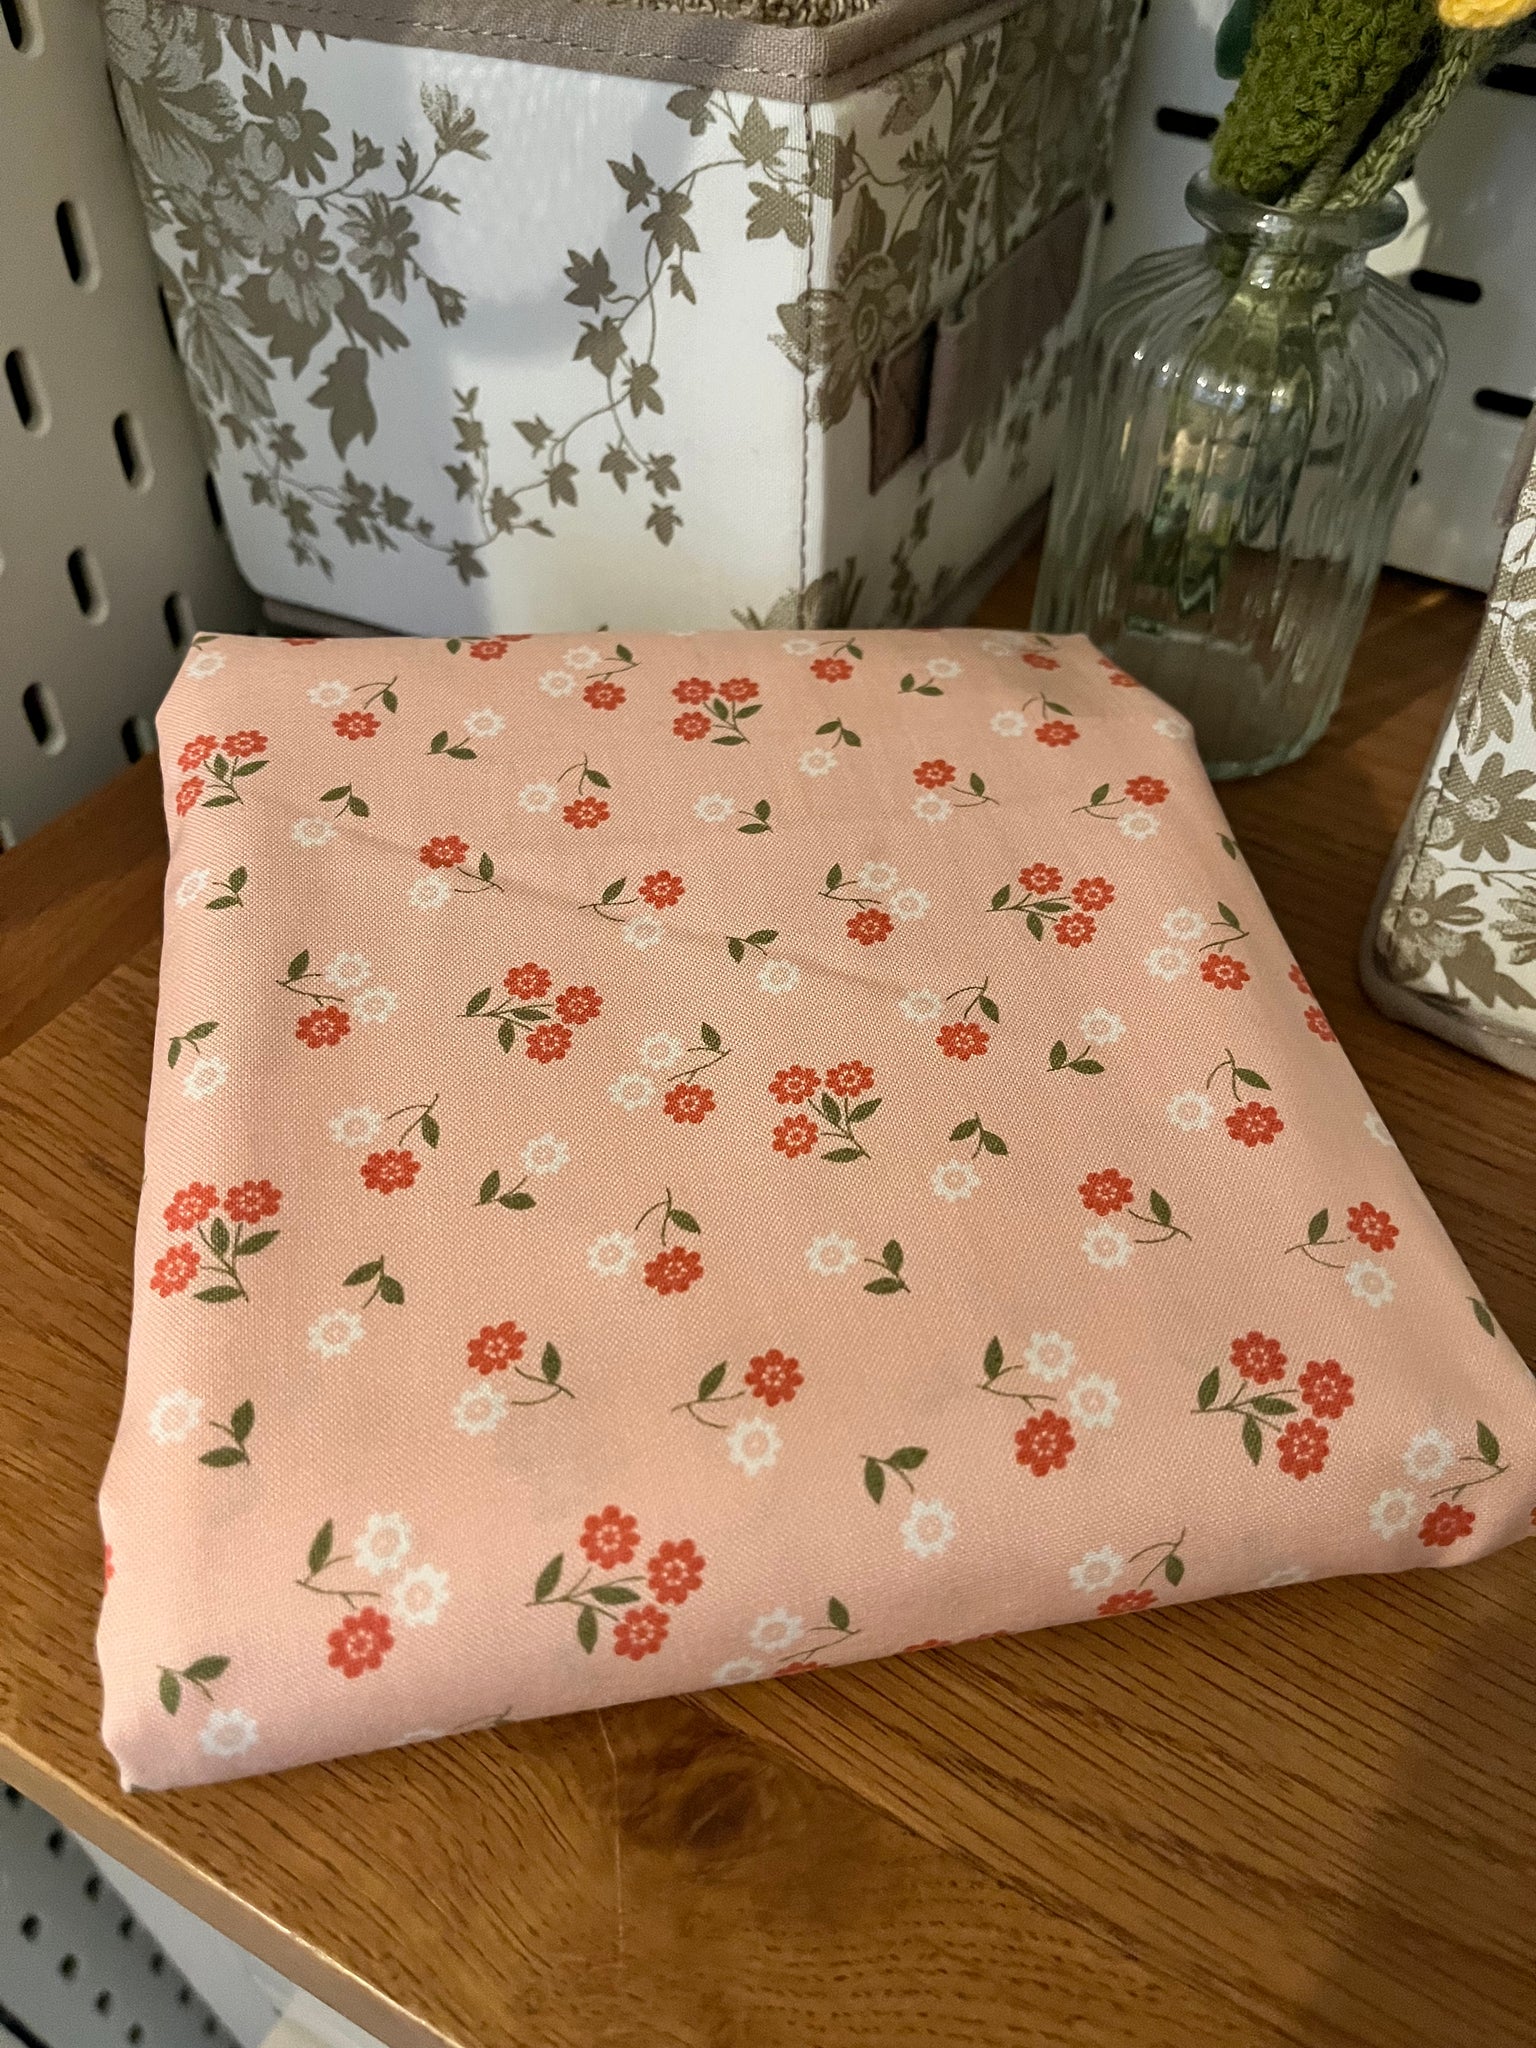 Sale Fabric 15: Pink Floral Country Rose Moda Fabric Remnant 52" x 45"